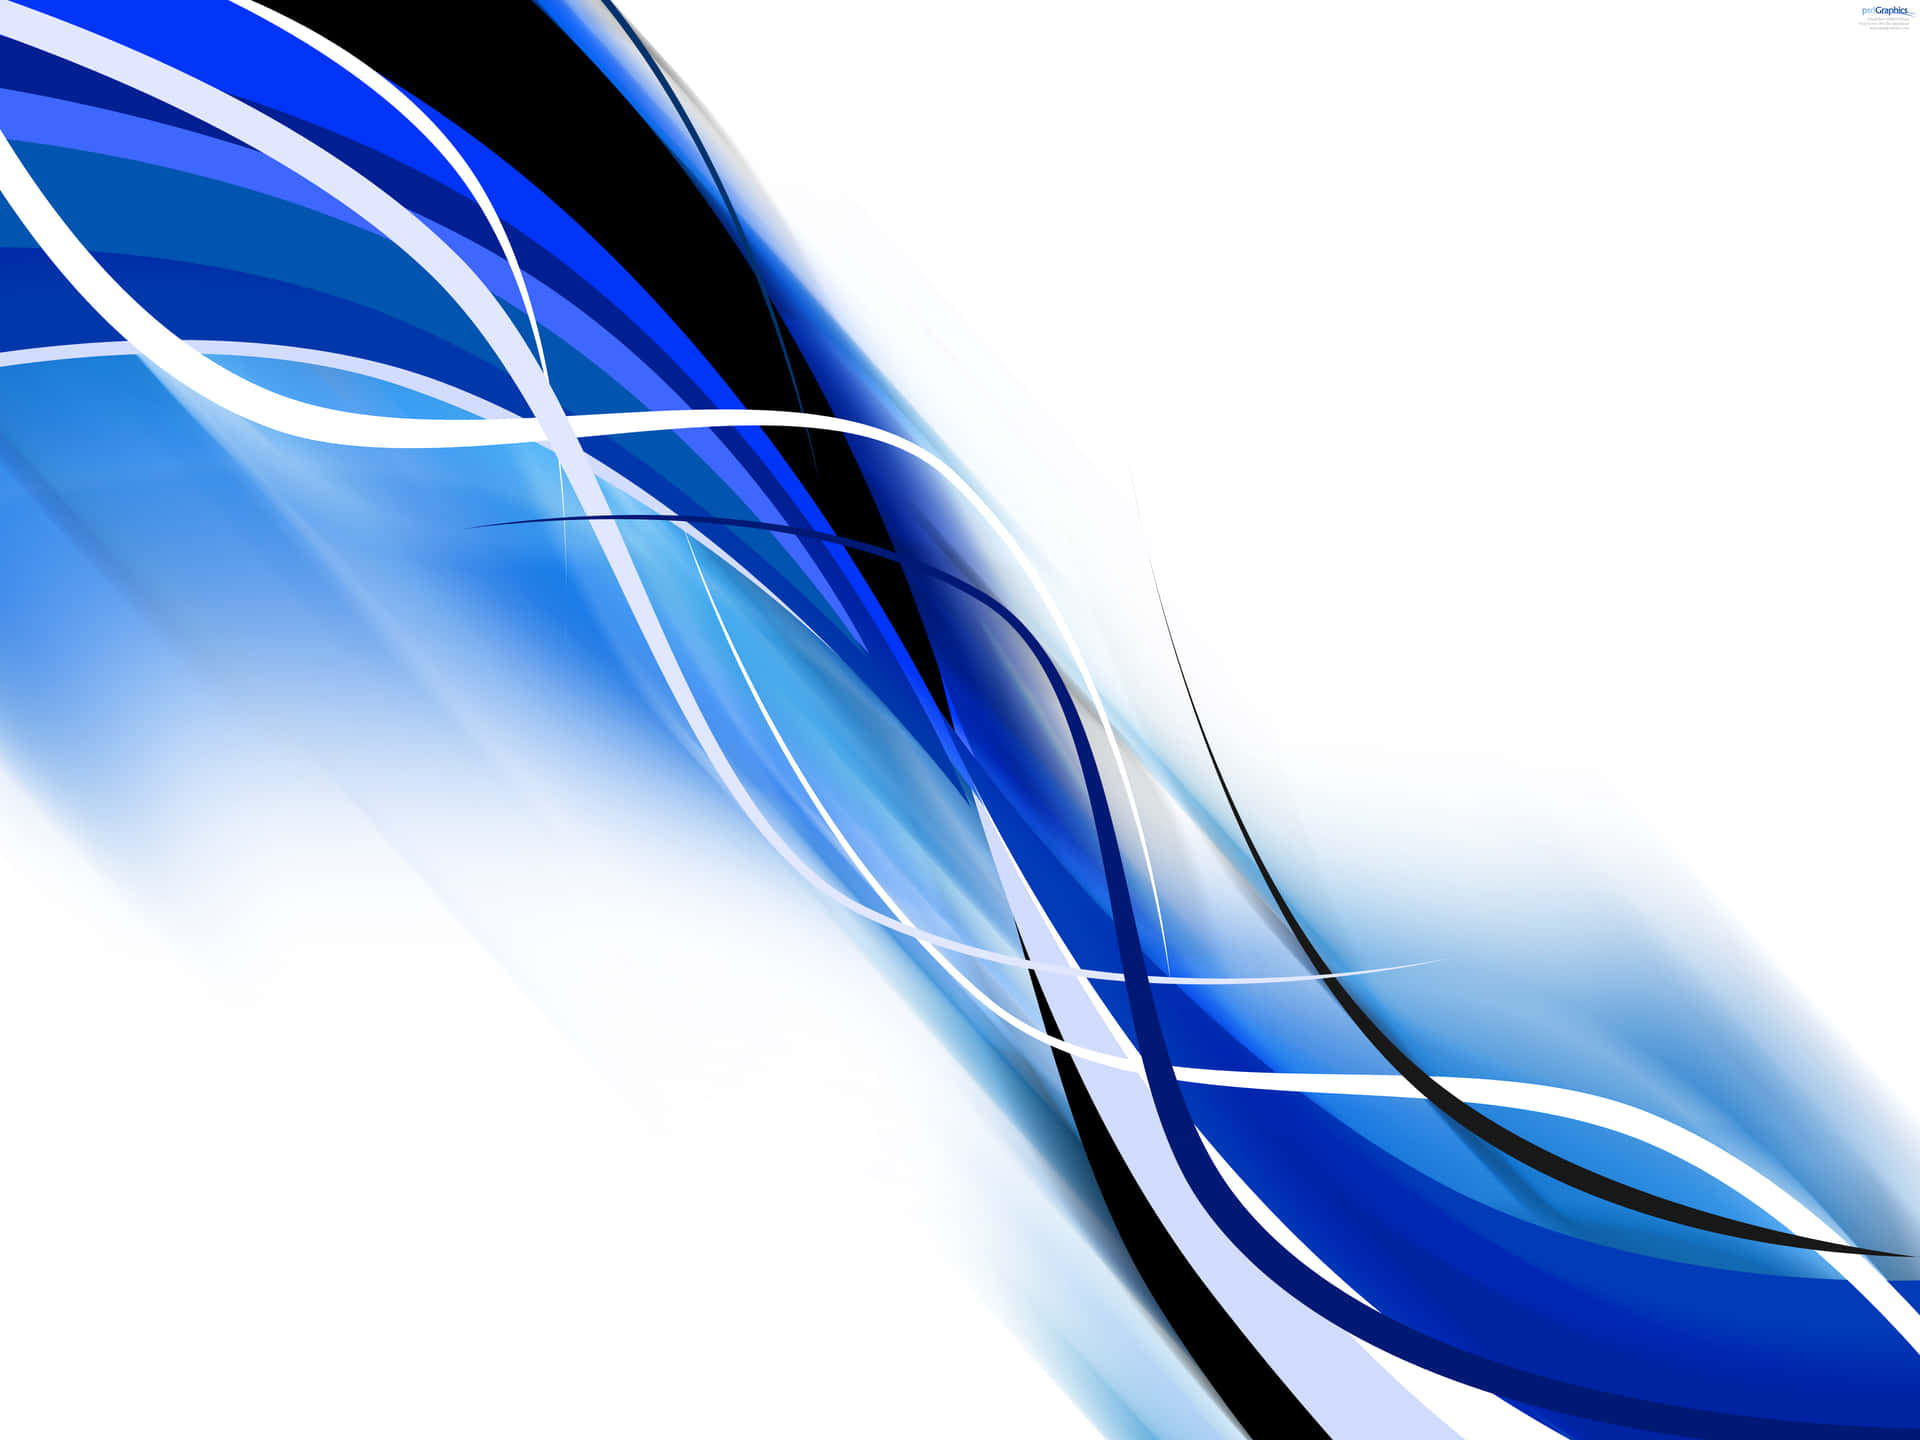 A striking blue abstract background